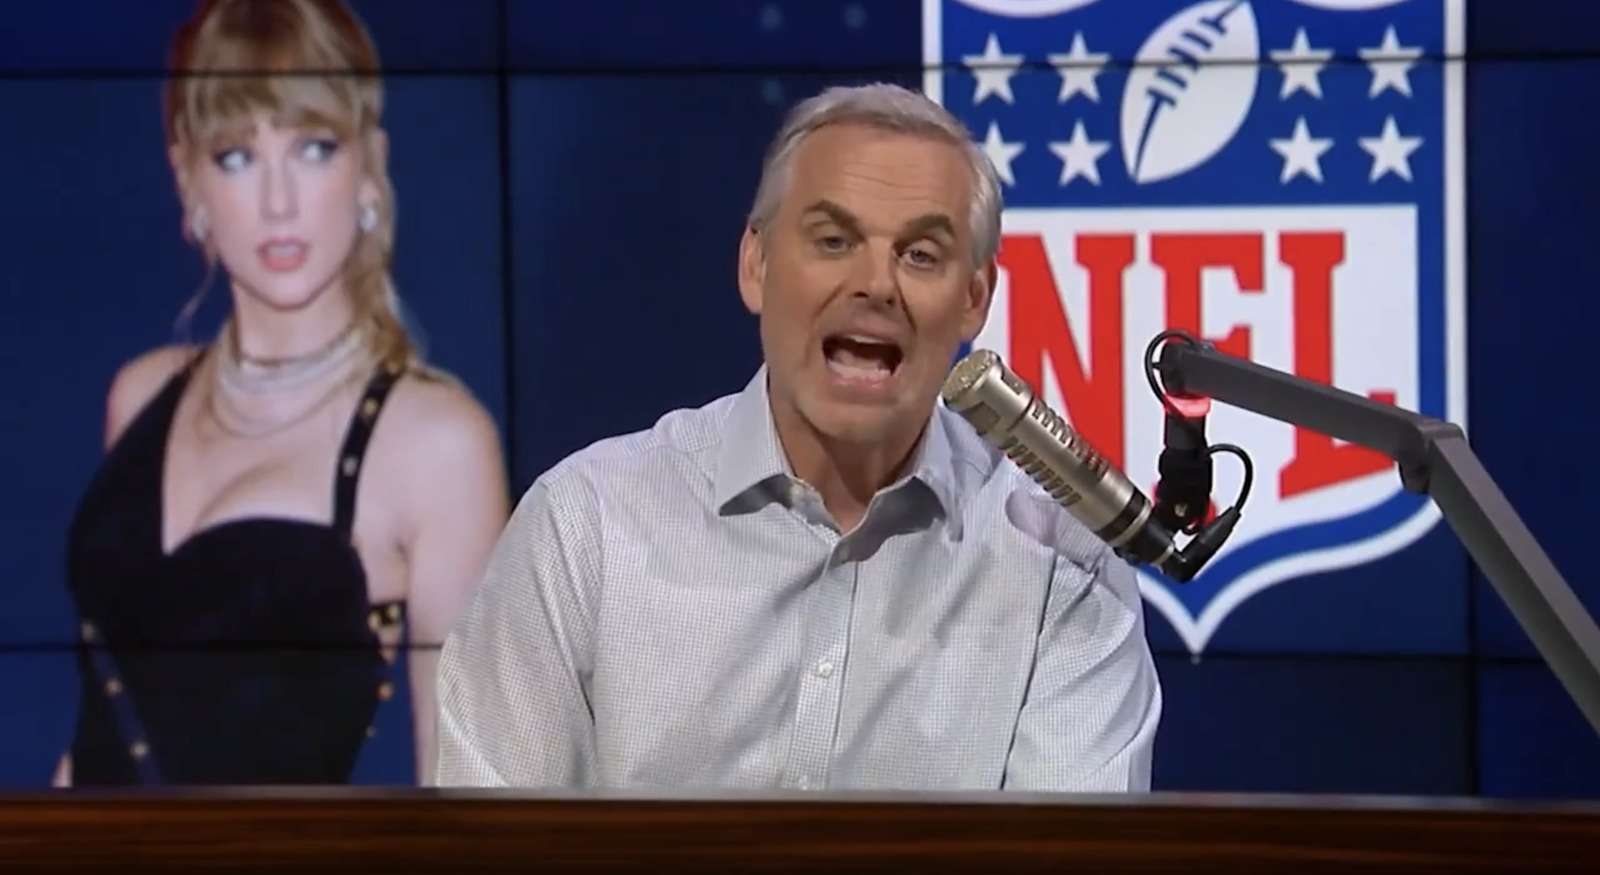 Colin Cowherd bashes ‘lonely, insecure men’ in Taylor Swift rant